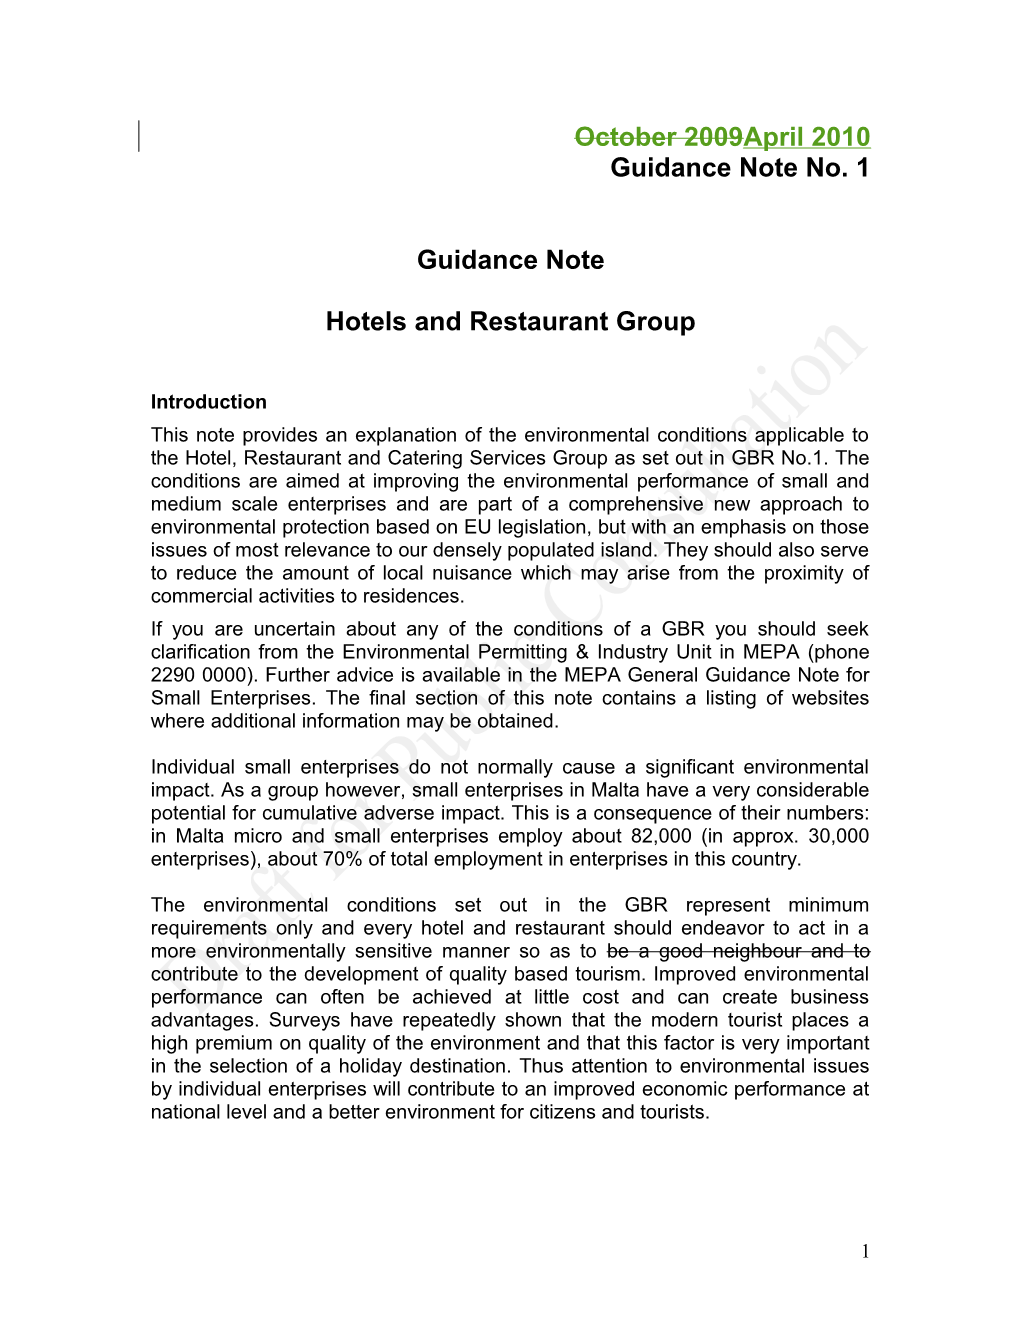 Guidance Note Hotels